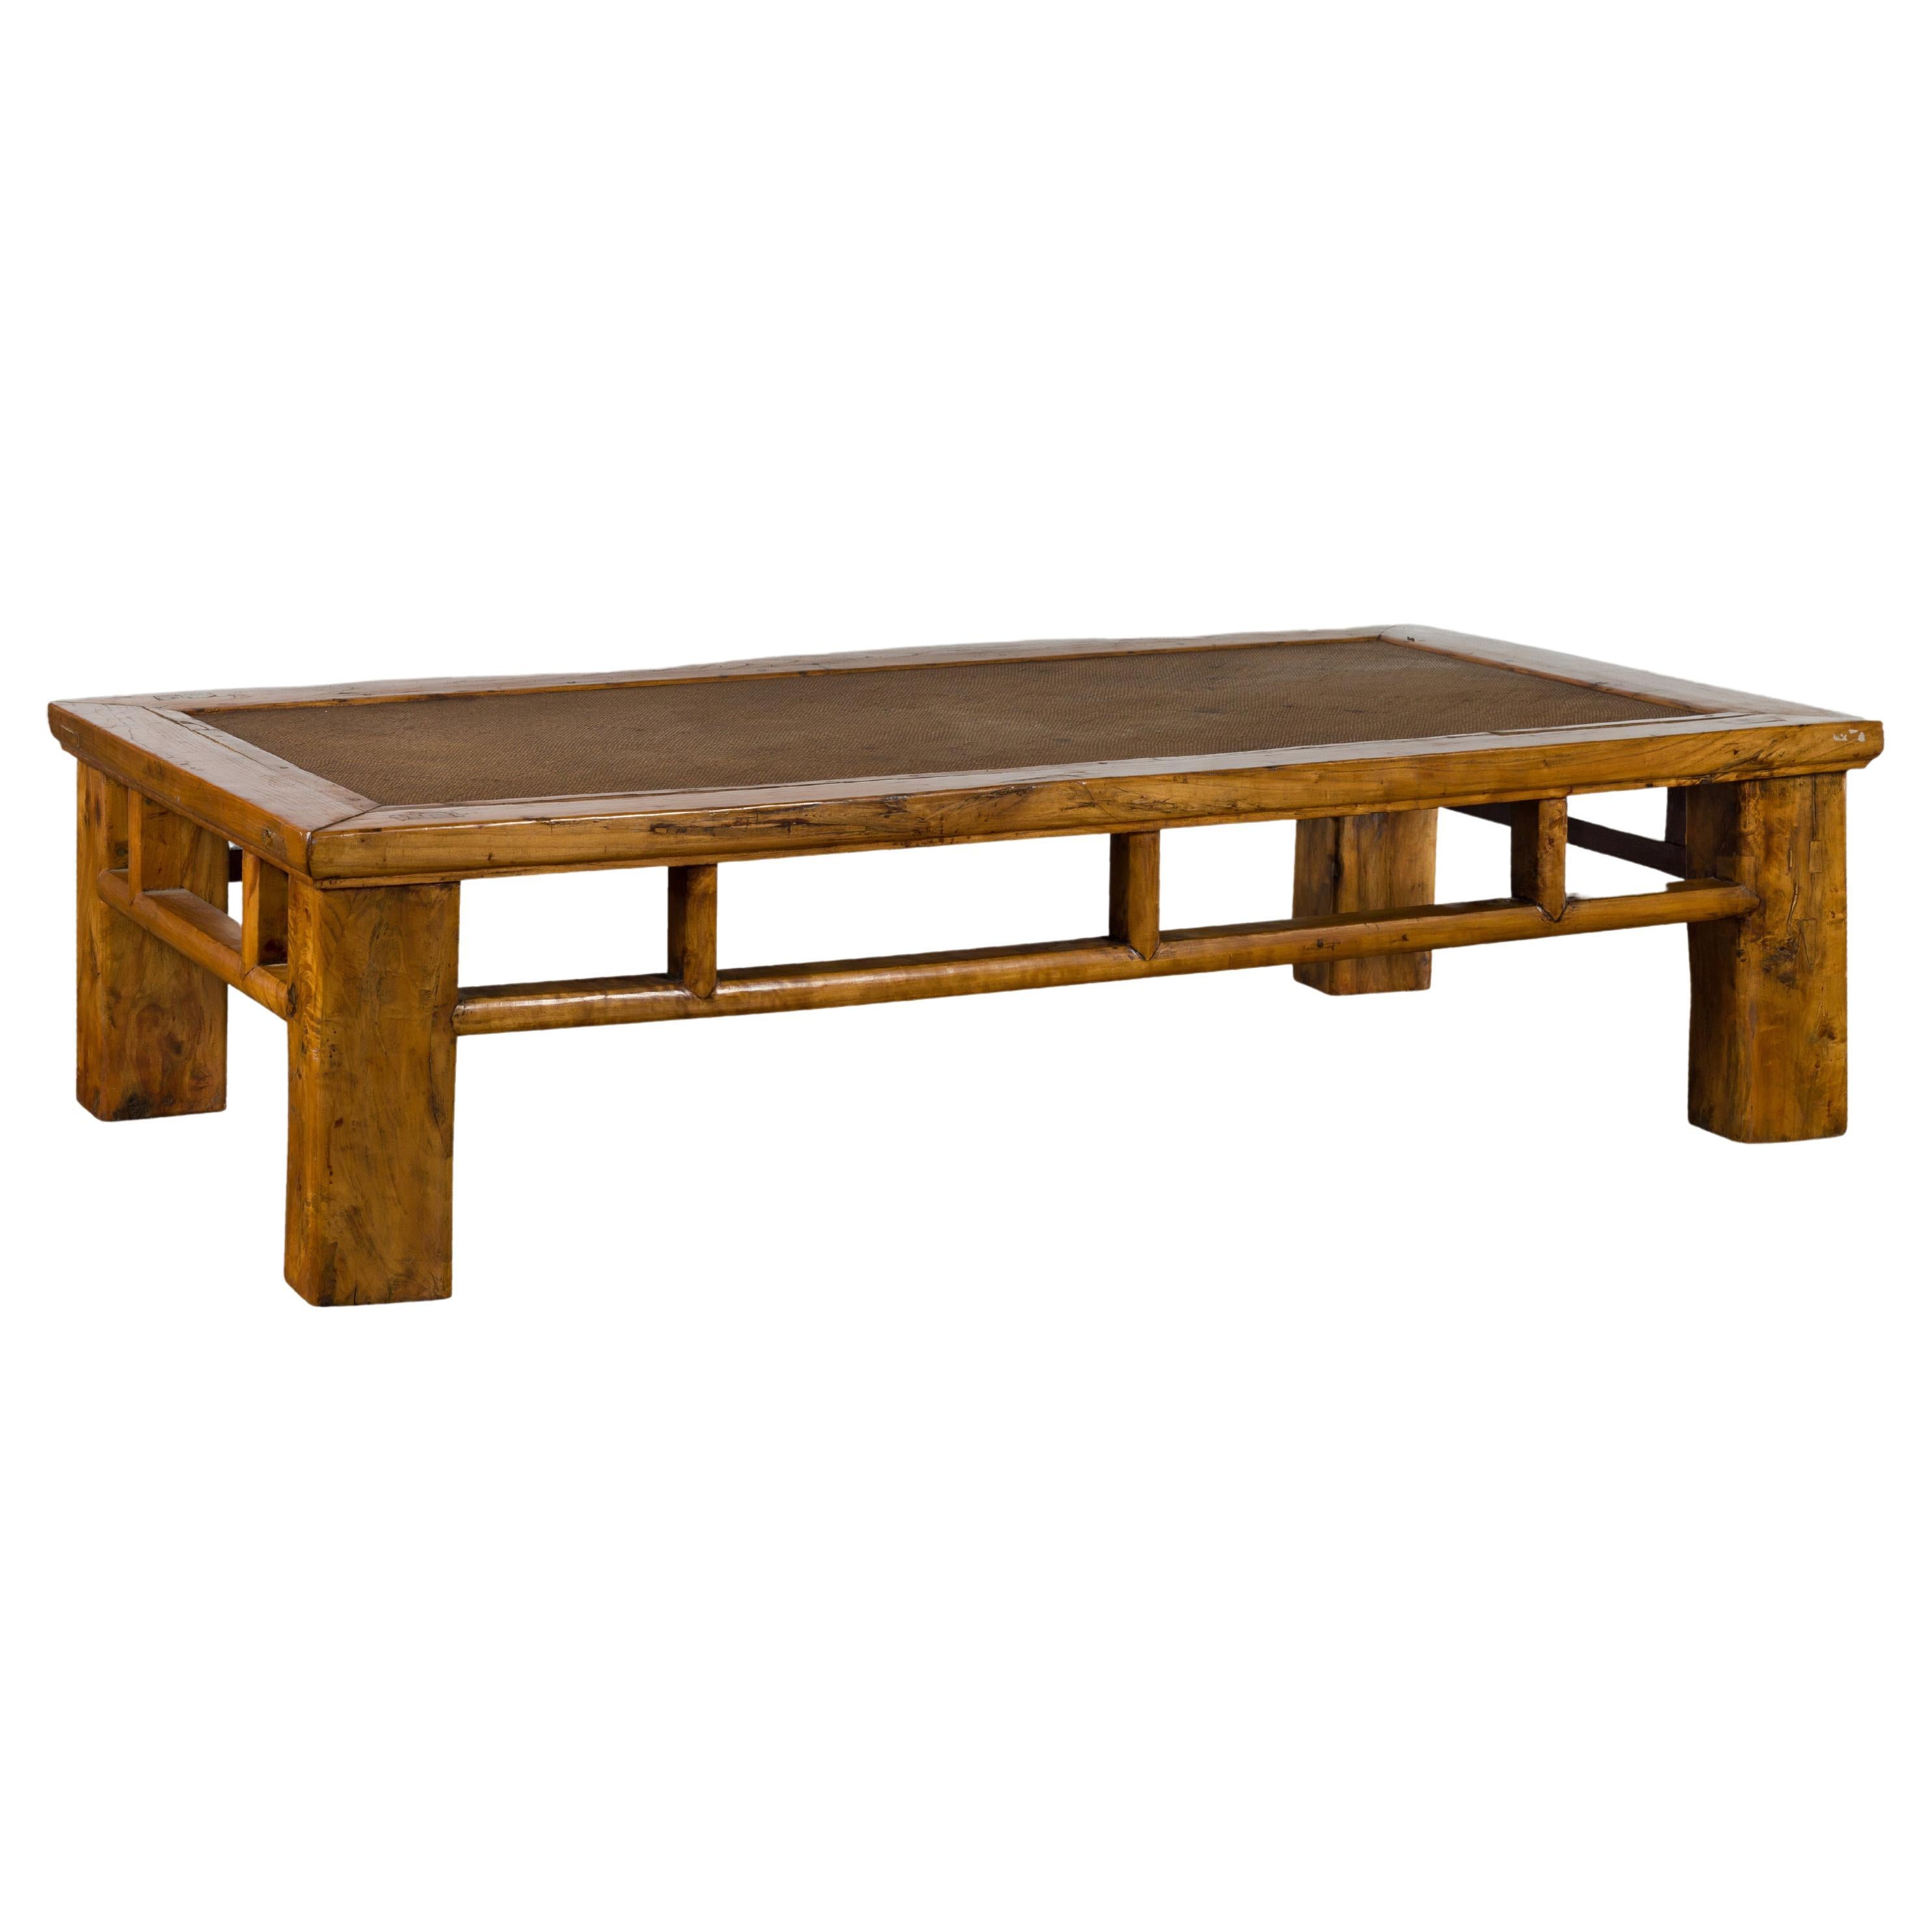 Chinese Qing Dynasty Elm Lohan Bed Coffee Table with Hand-Woven Rattan Top For Sale